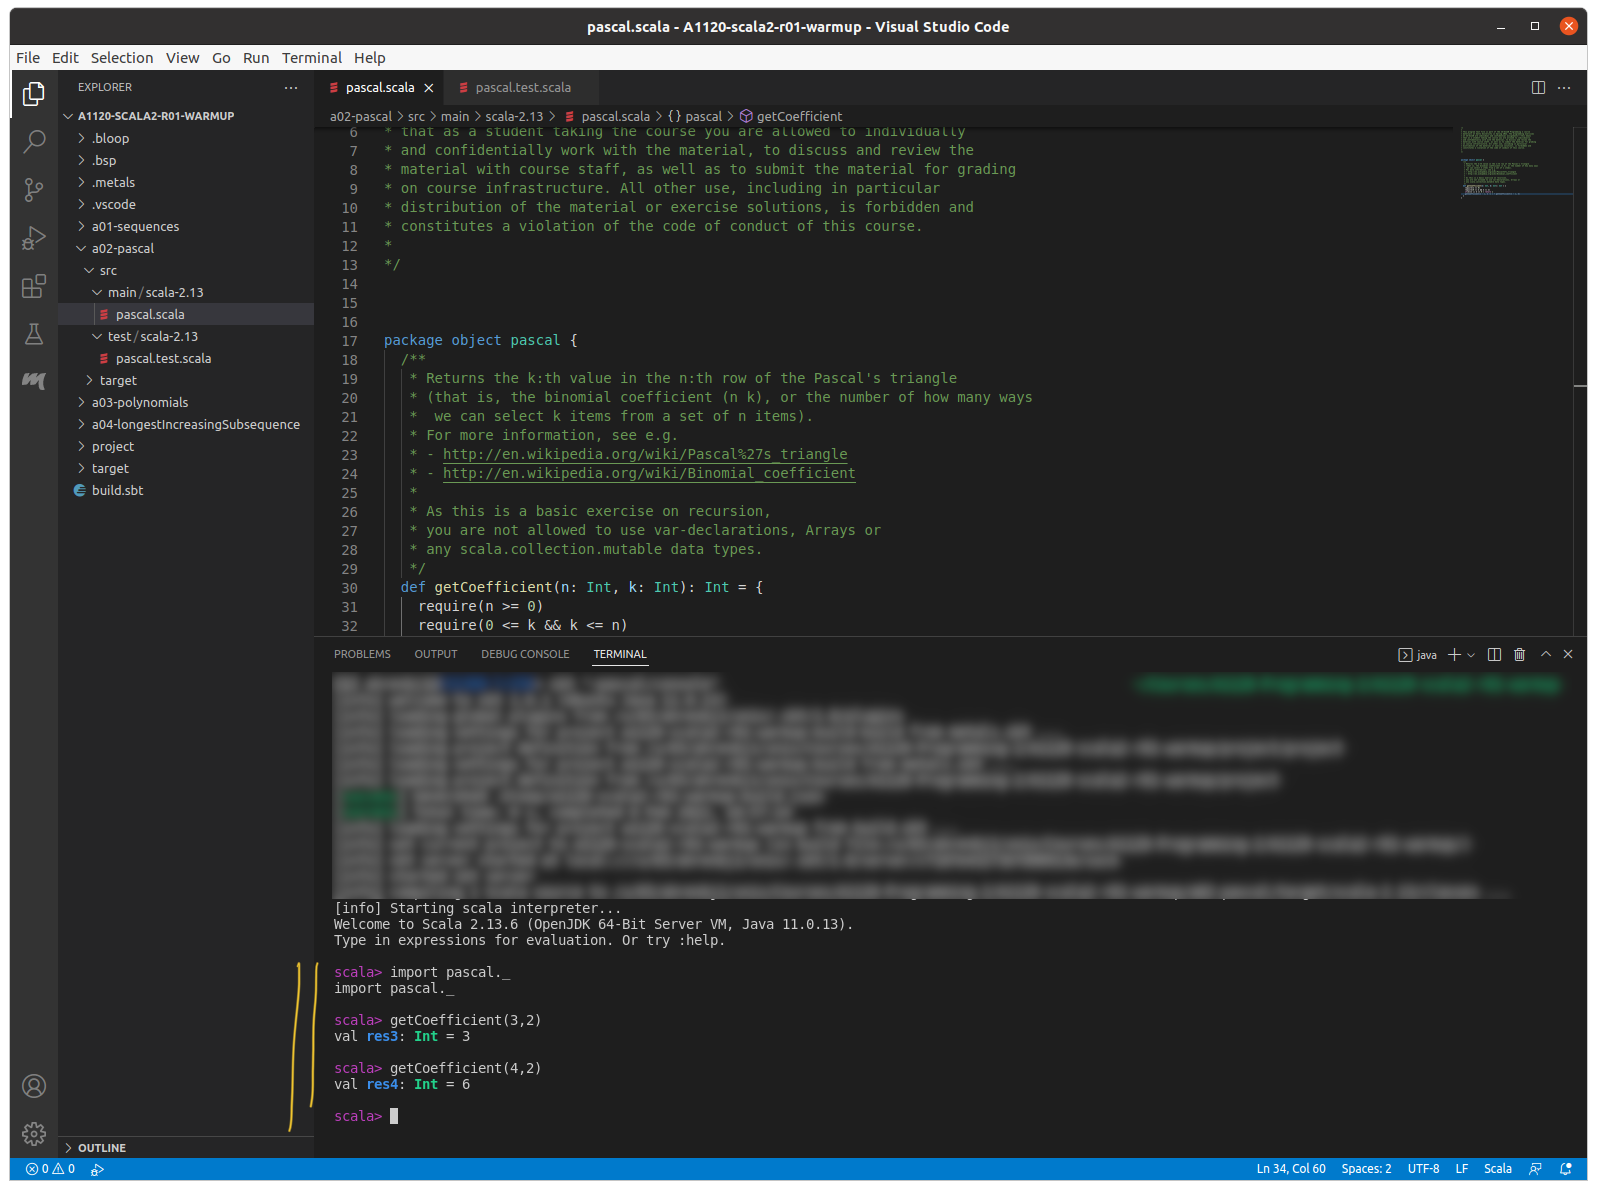 _images/vscode-console-2-annot.png